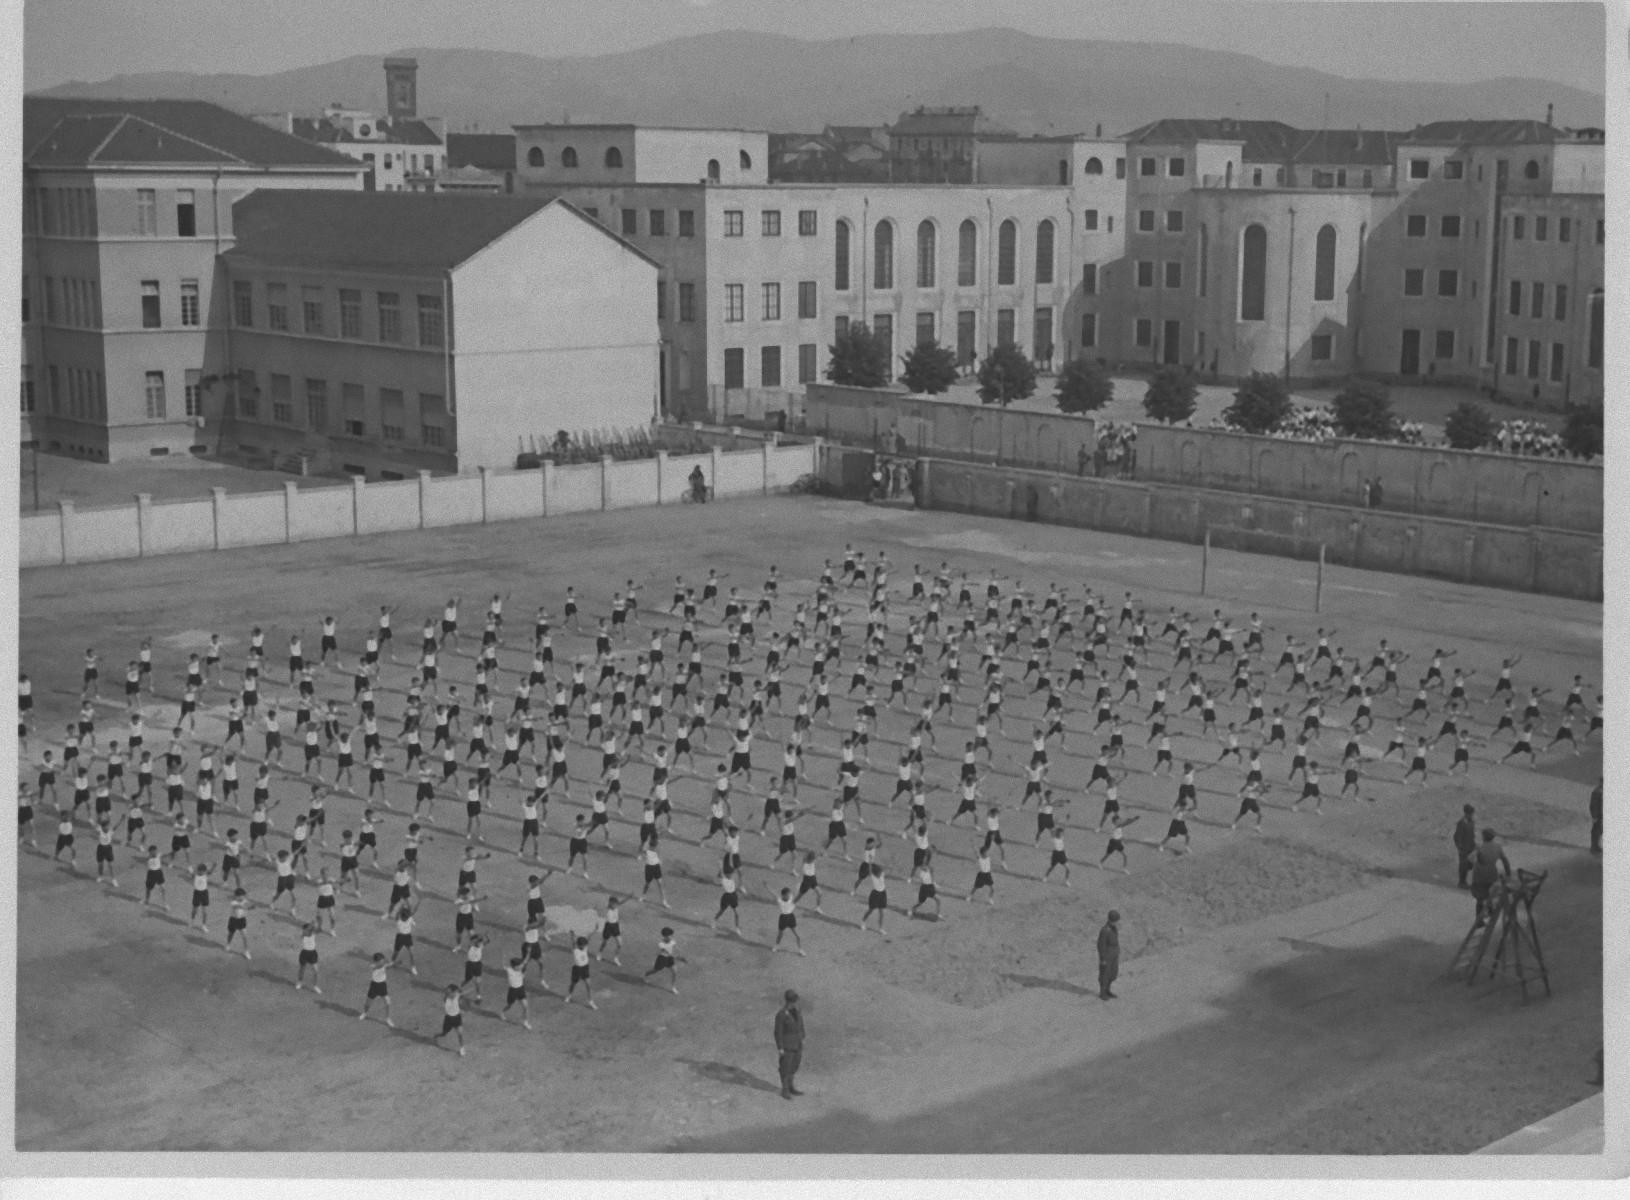 Unknown Figurative Photograph - Physical Education in a School During Fascism - Vintage b/w Photo - 1934 c.a.